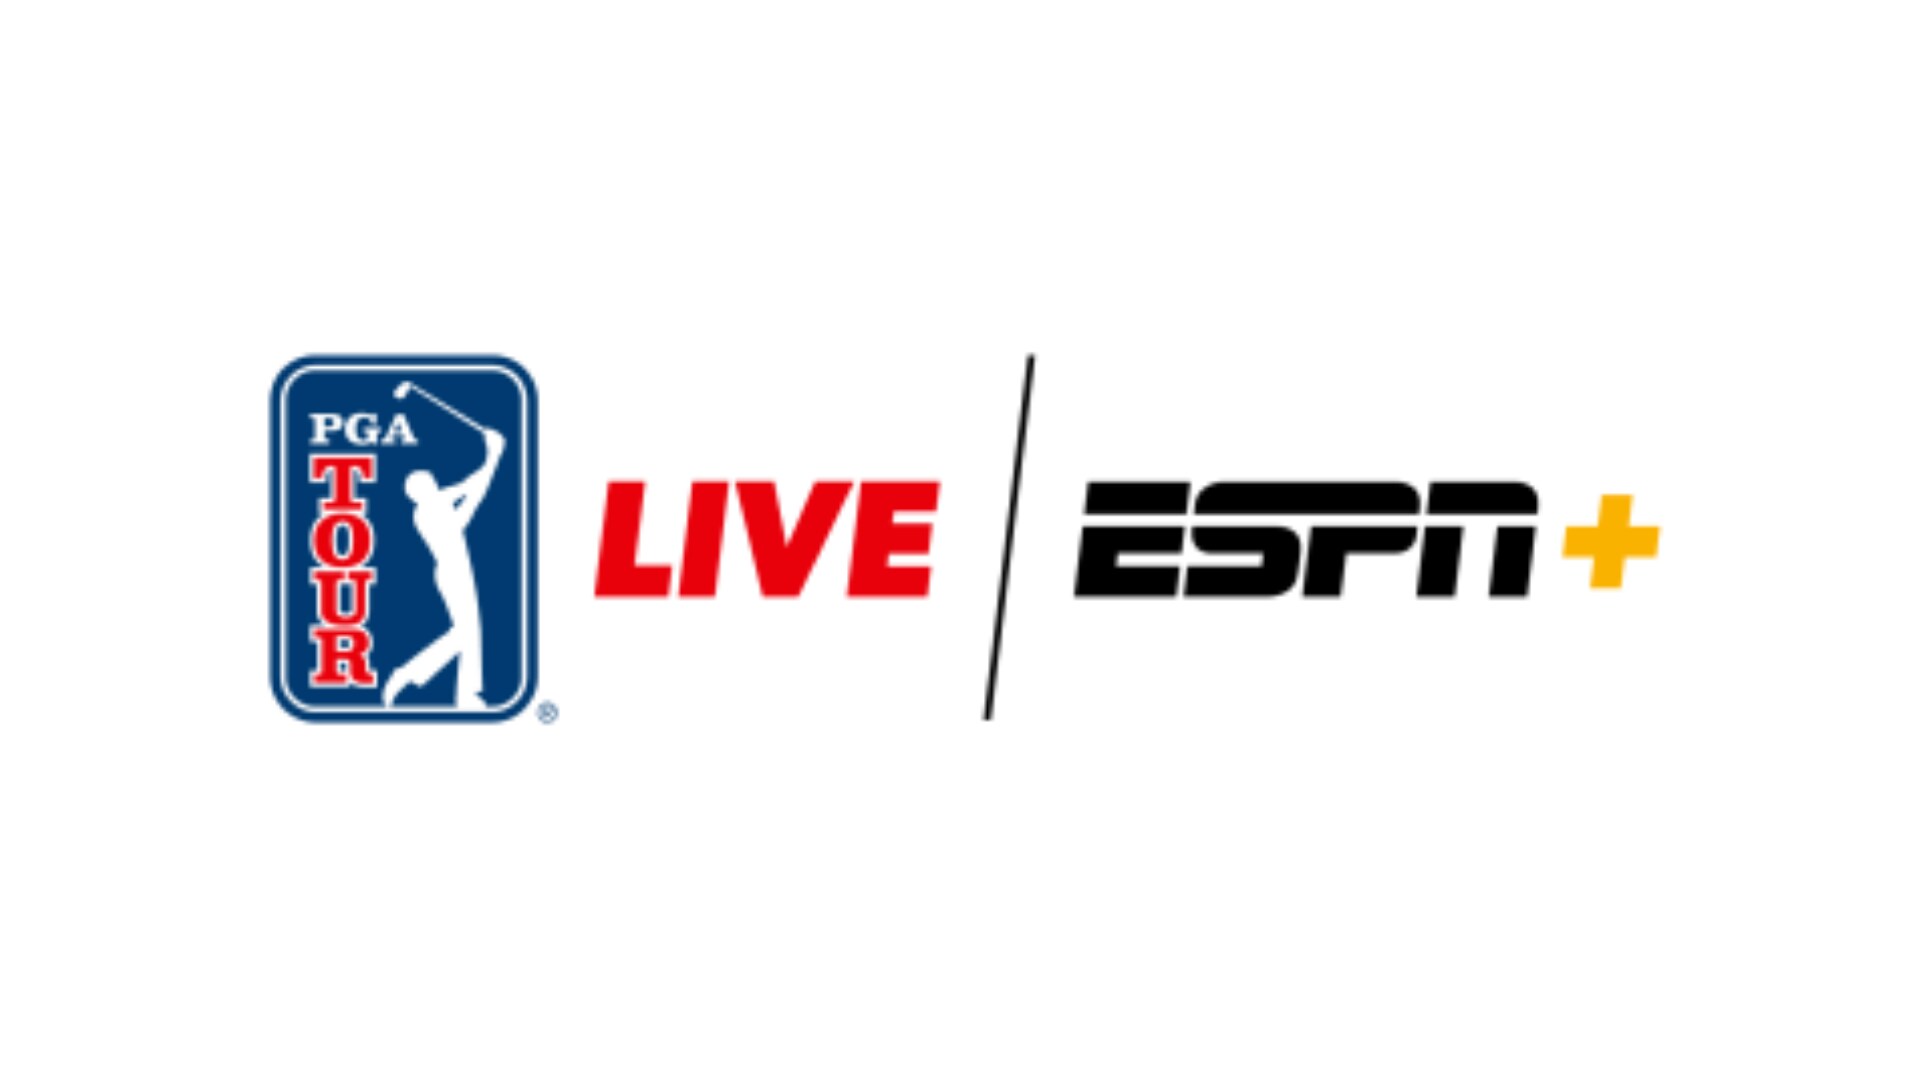 Exclusively on ESPN+ Thursday and Friday: PGA TOUR LIVE to Showcase FedExCup Champions, Major Champions, Recent TOUR Winners, 16th Hole at WM Phoenix Open at TPC Scottsdale in Arizona